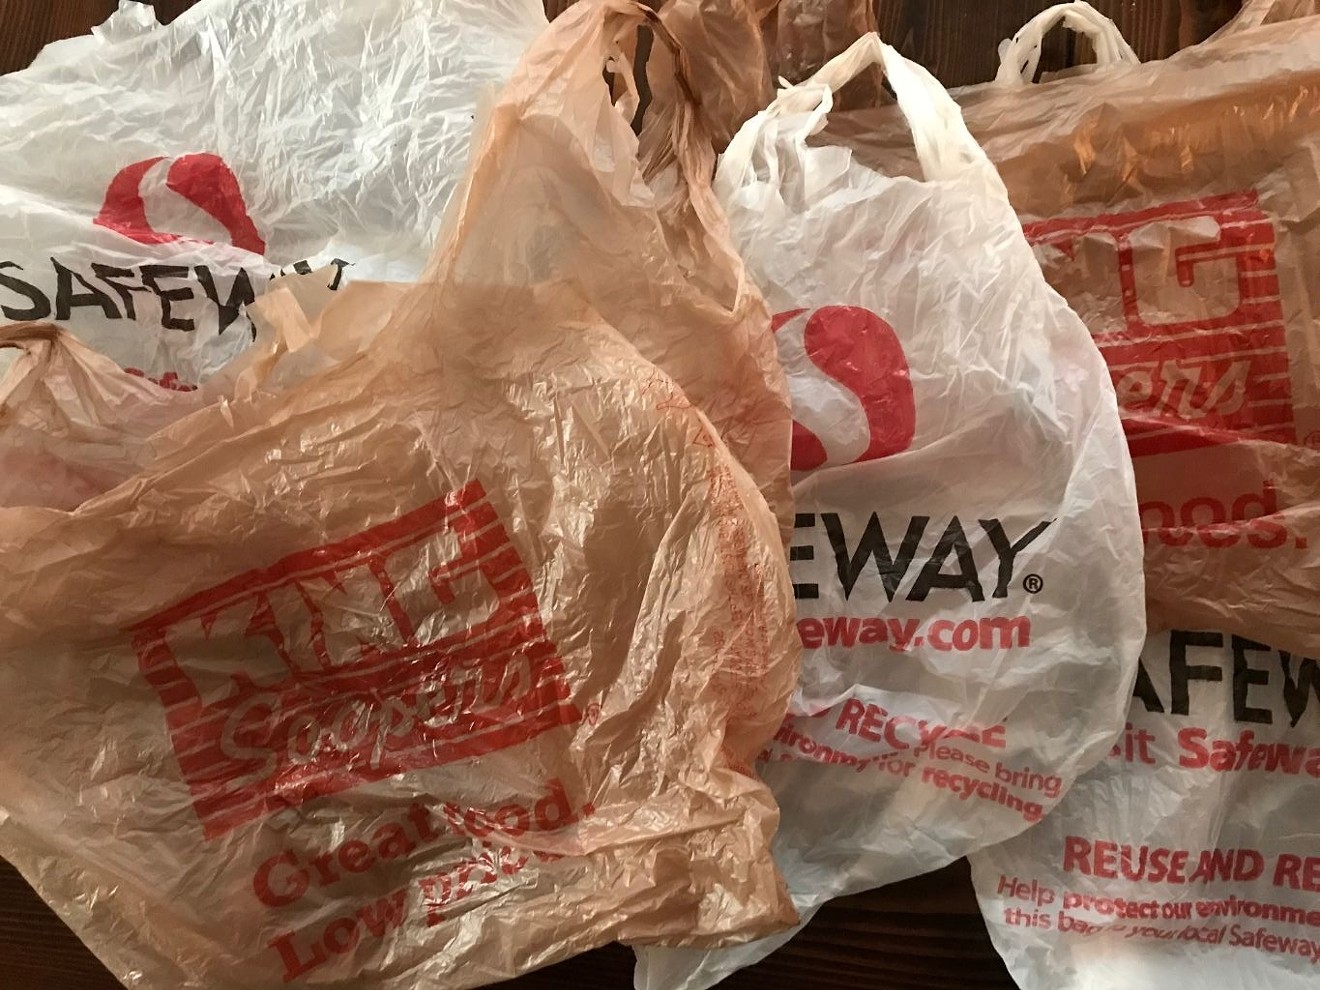 Plastic bags just survived their toughest statewide challenge yet.